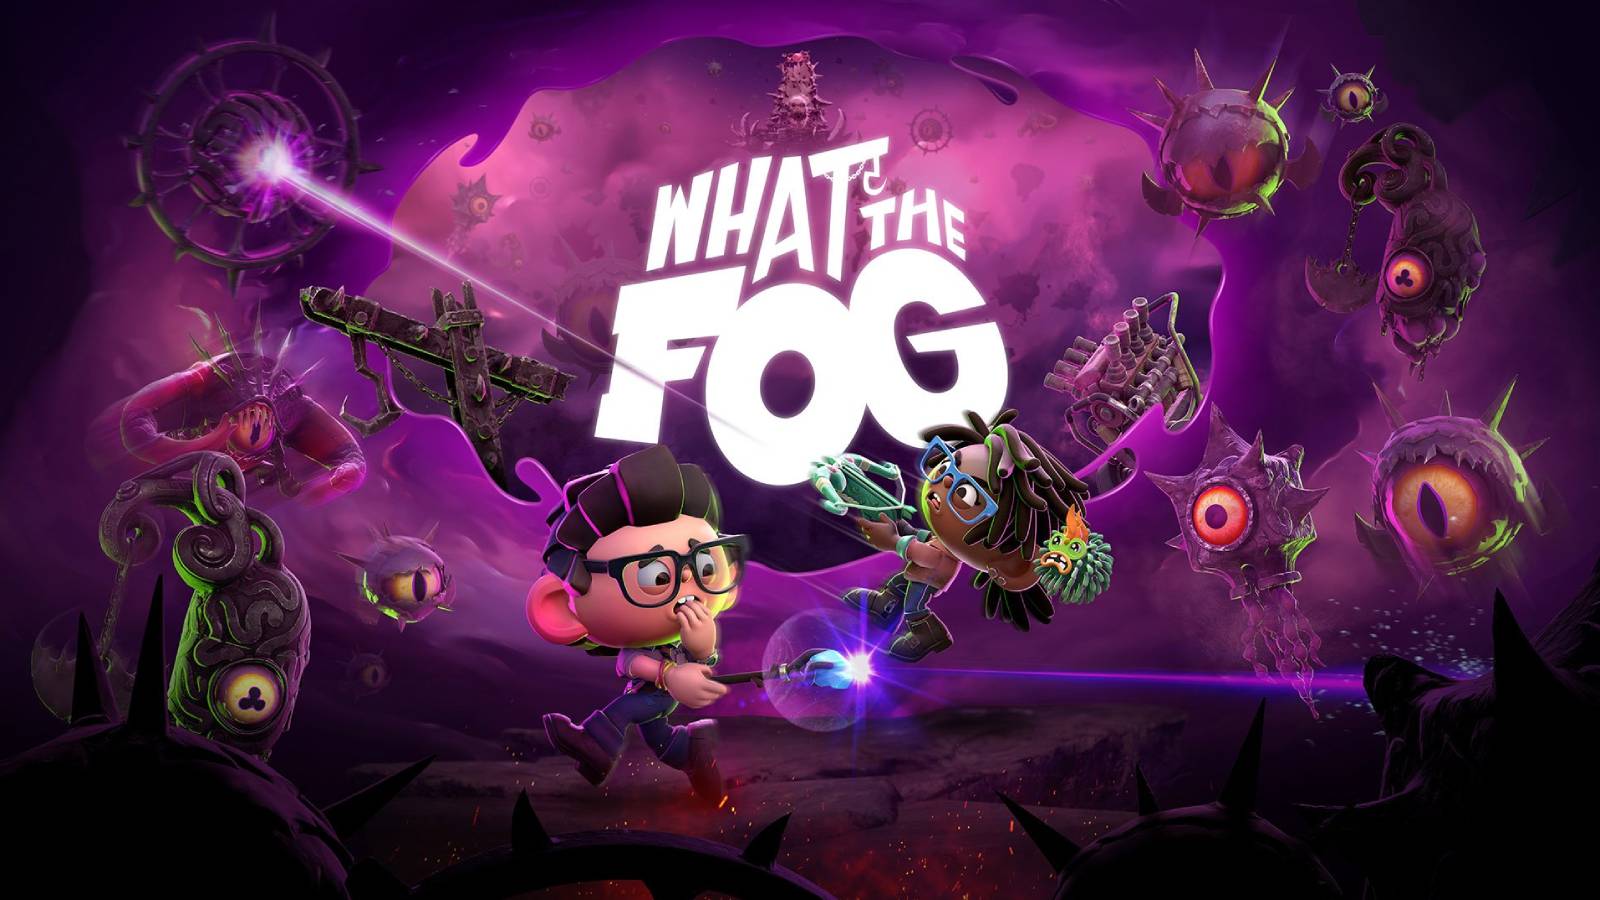 What the Fog cover art